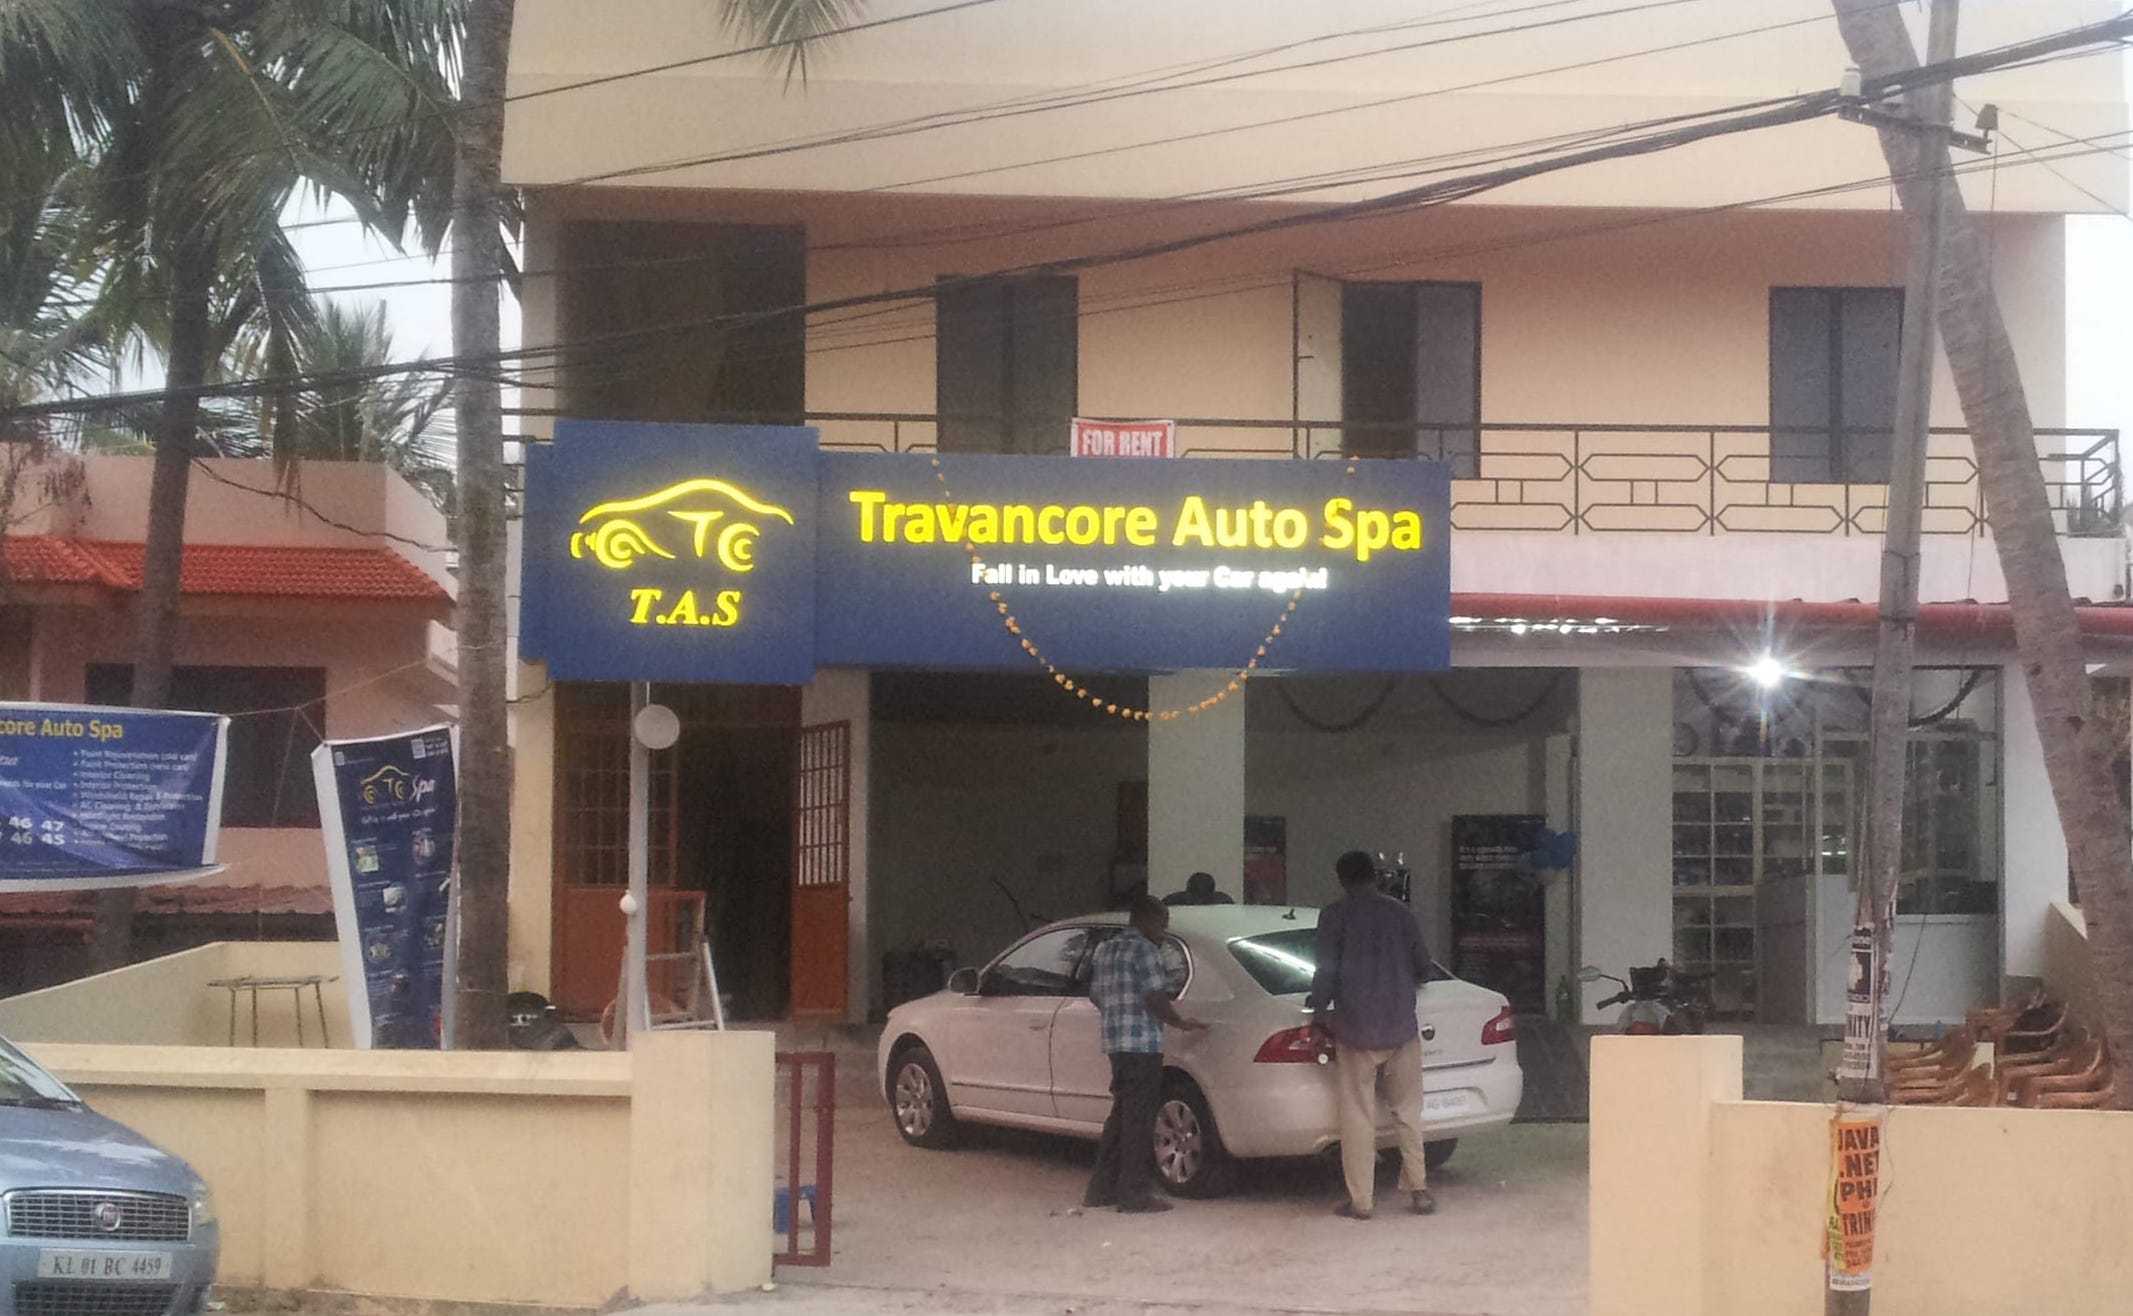 First day First vehicle at Travancore Auto Spa, Trivandrum